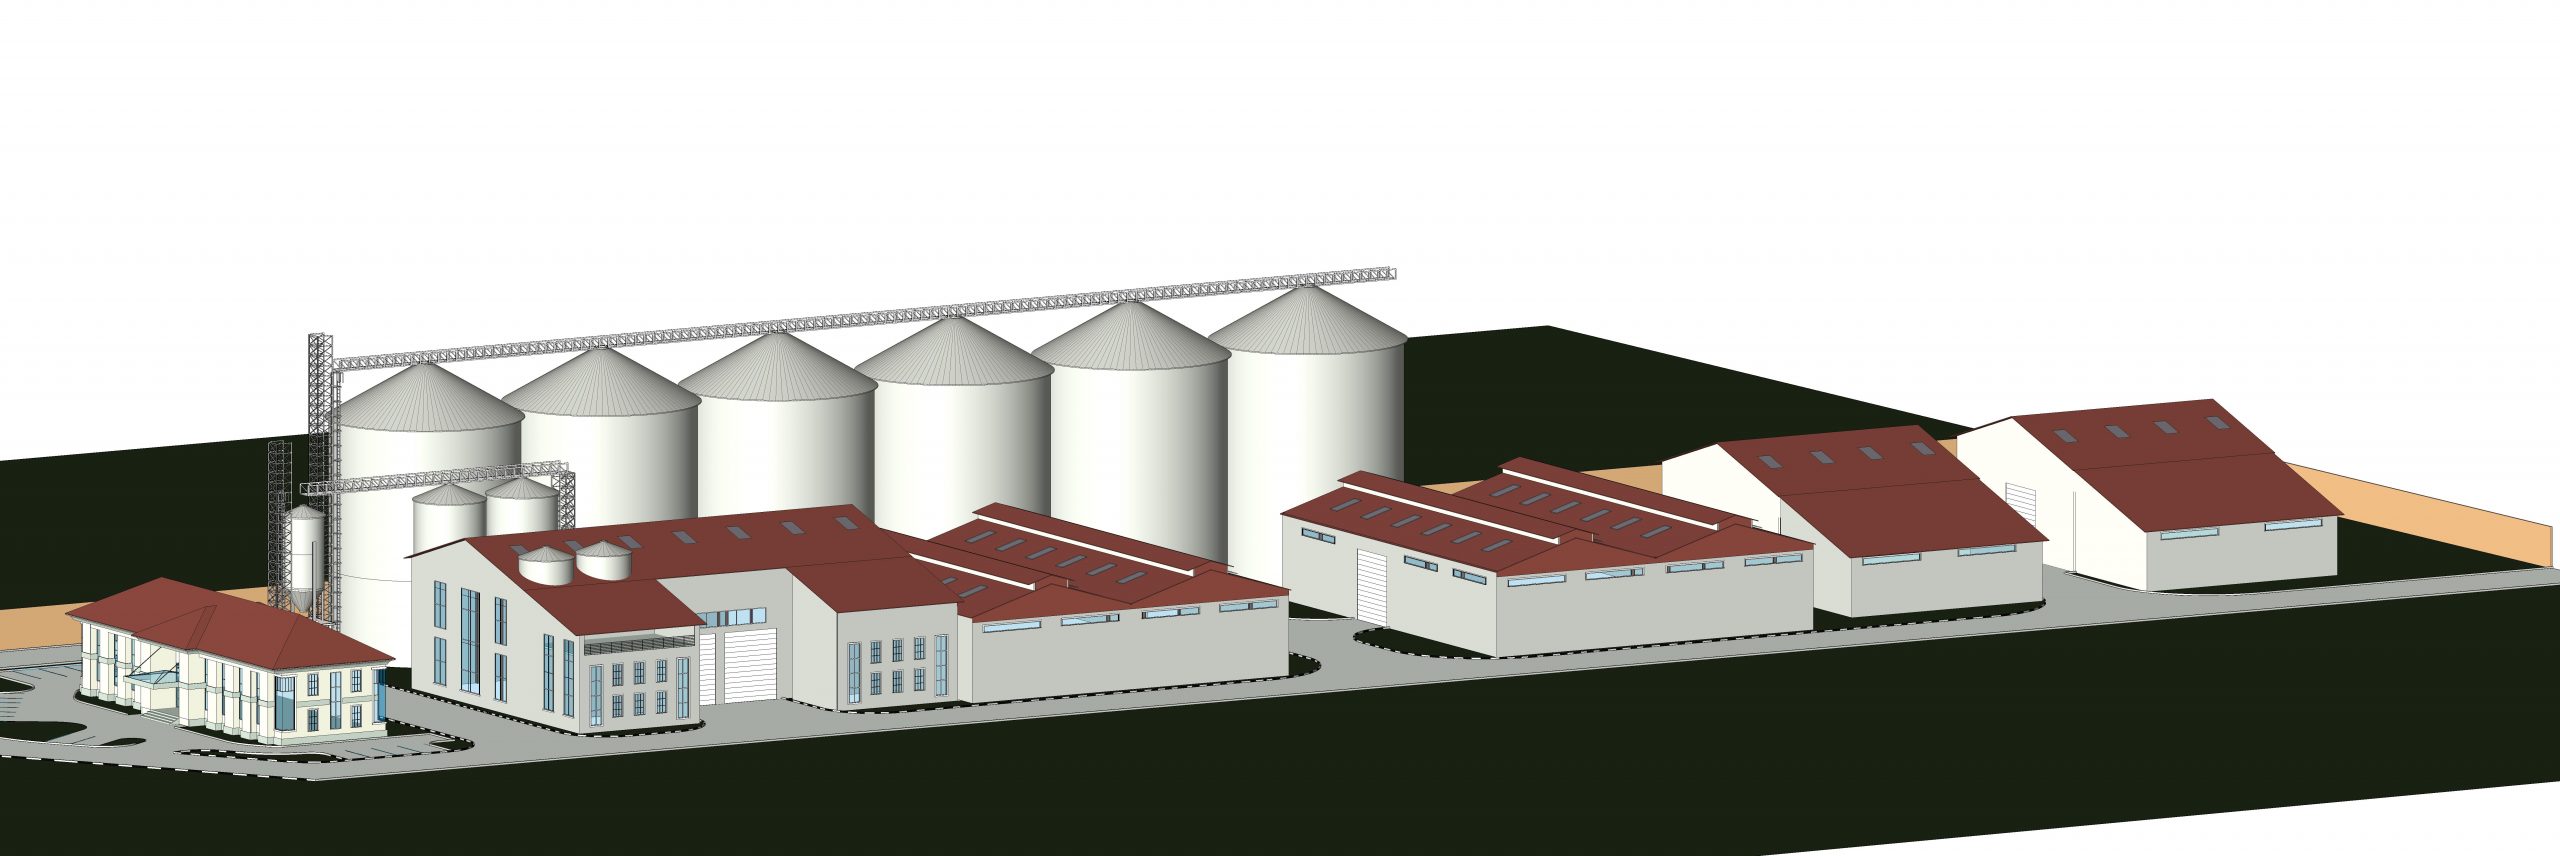 AGRIC GRAIN PROCESSING